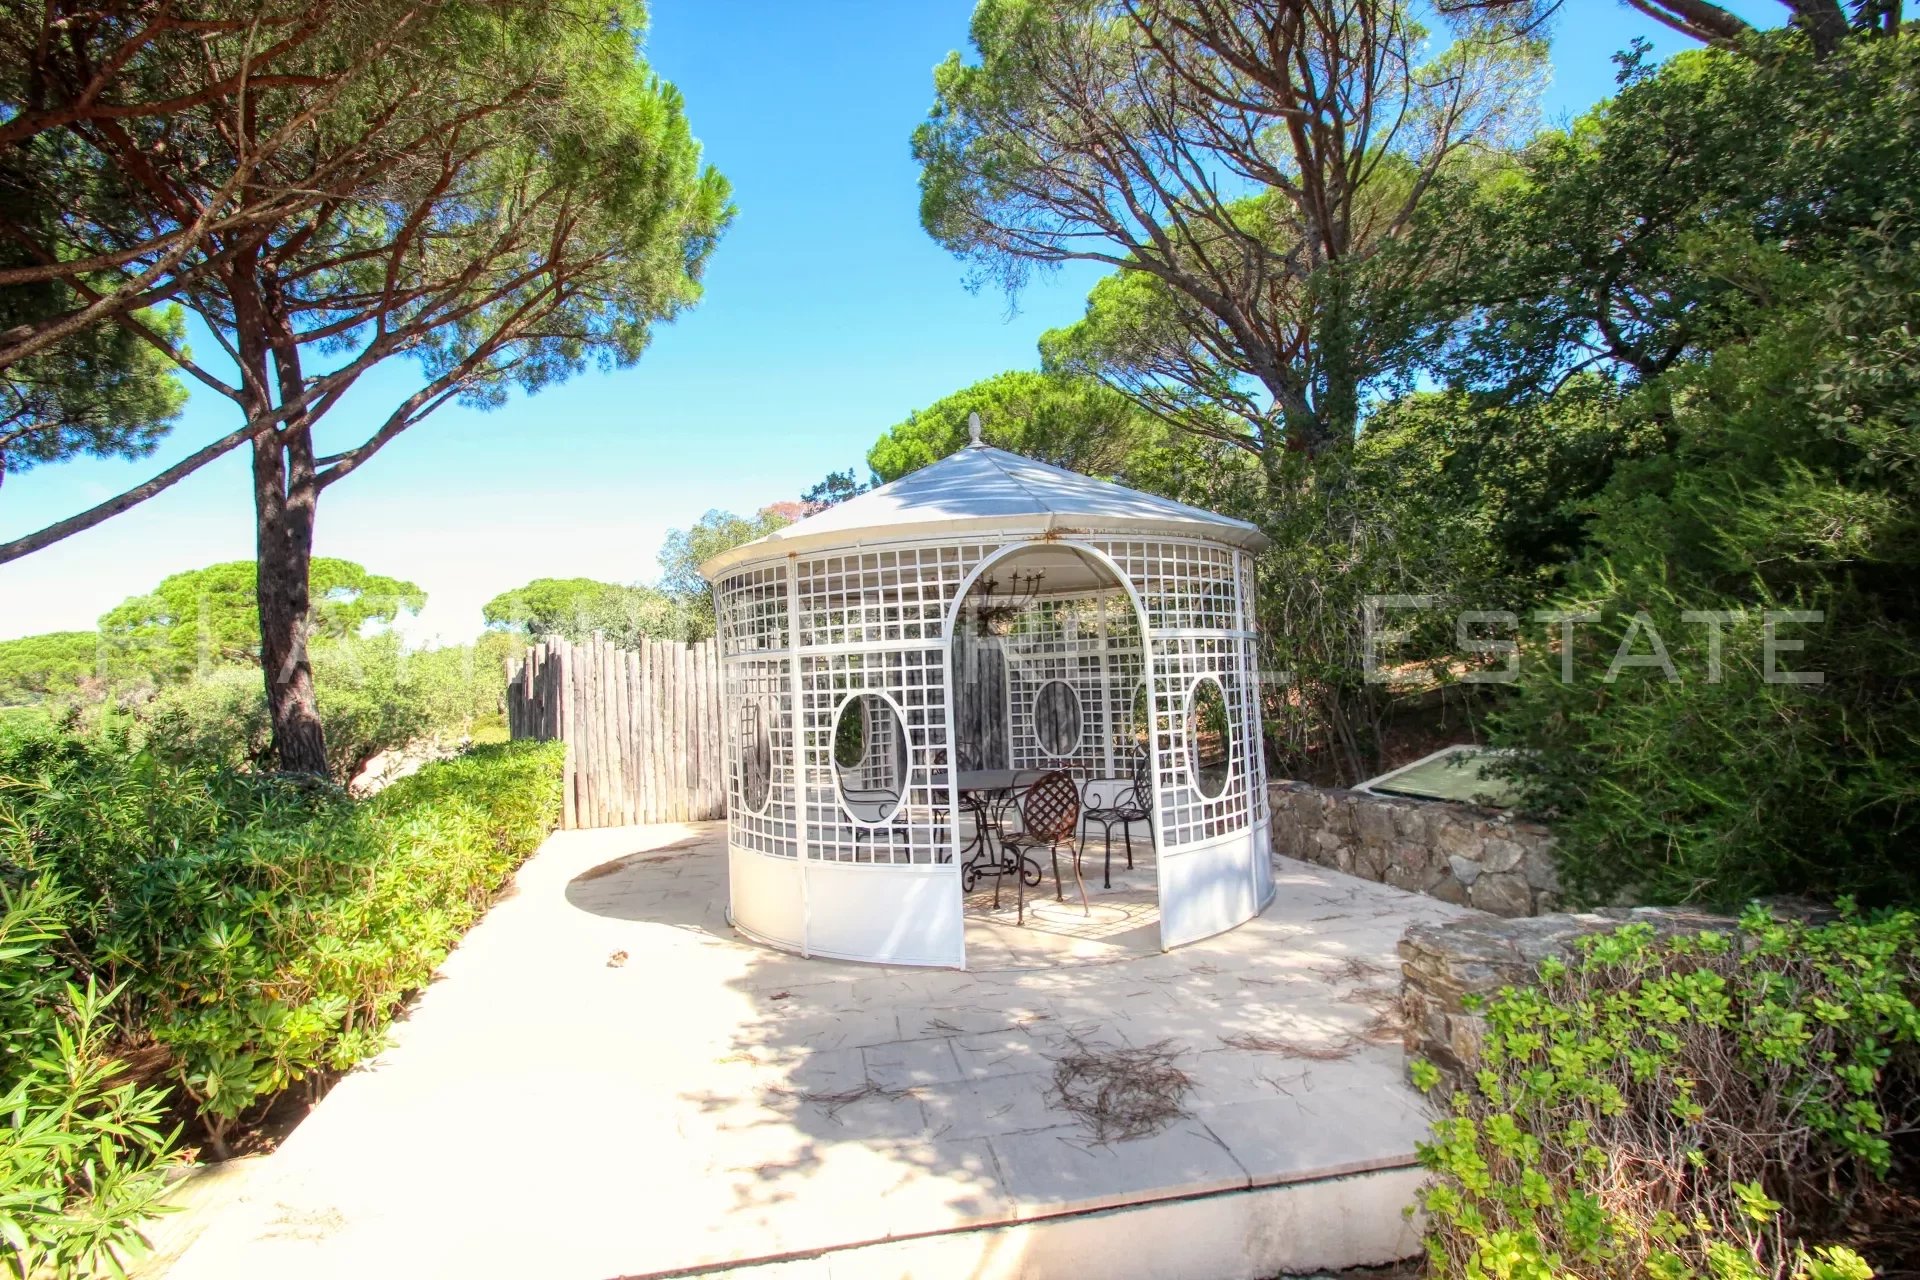 RAMATUELLE - PROPERTY OF 17 HECTARES Property of 439 m2 - Land of 17 hectares - 10 bedrooms